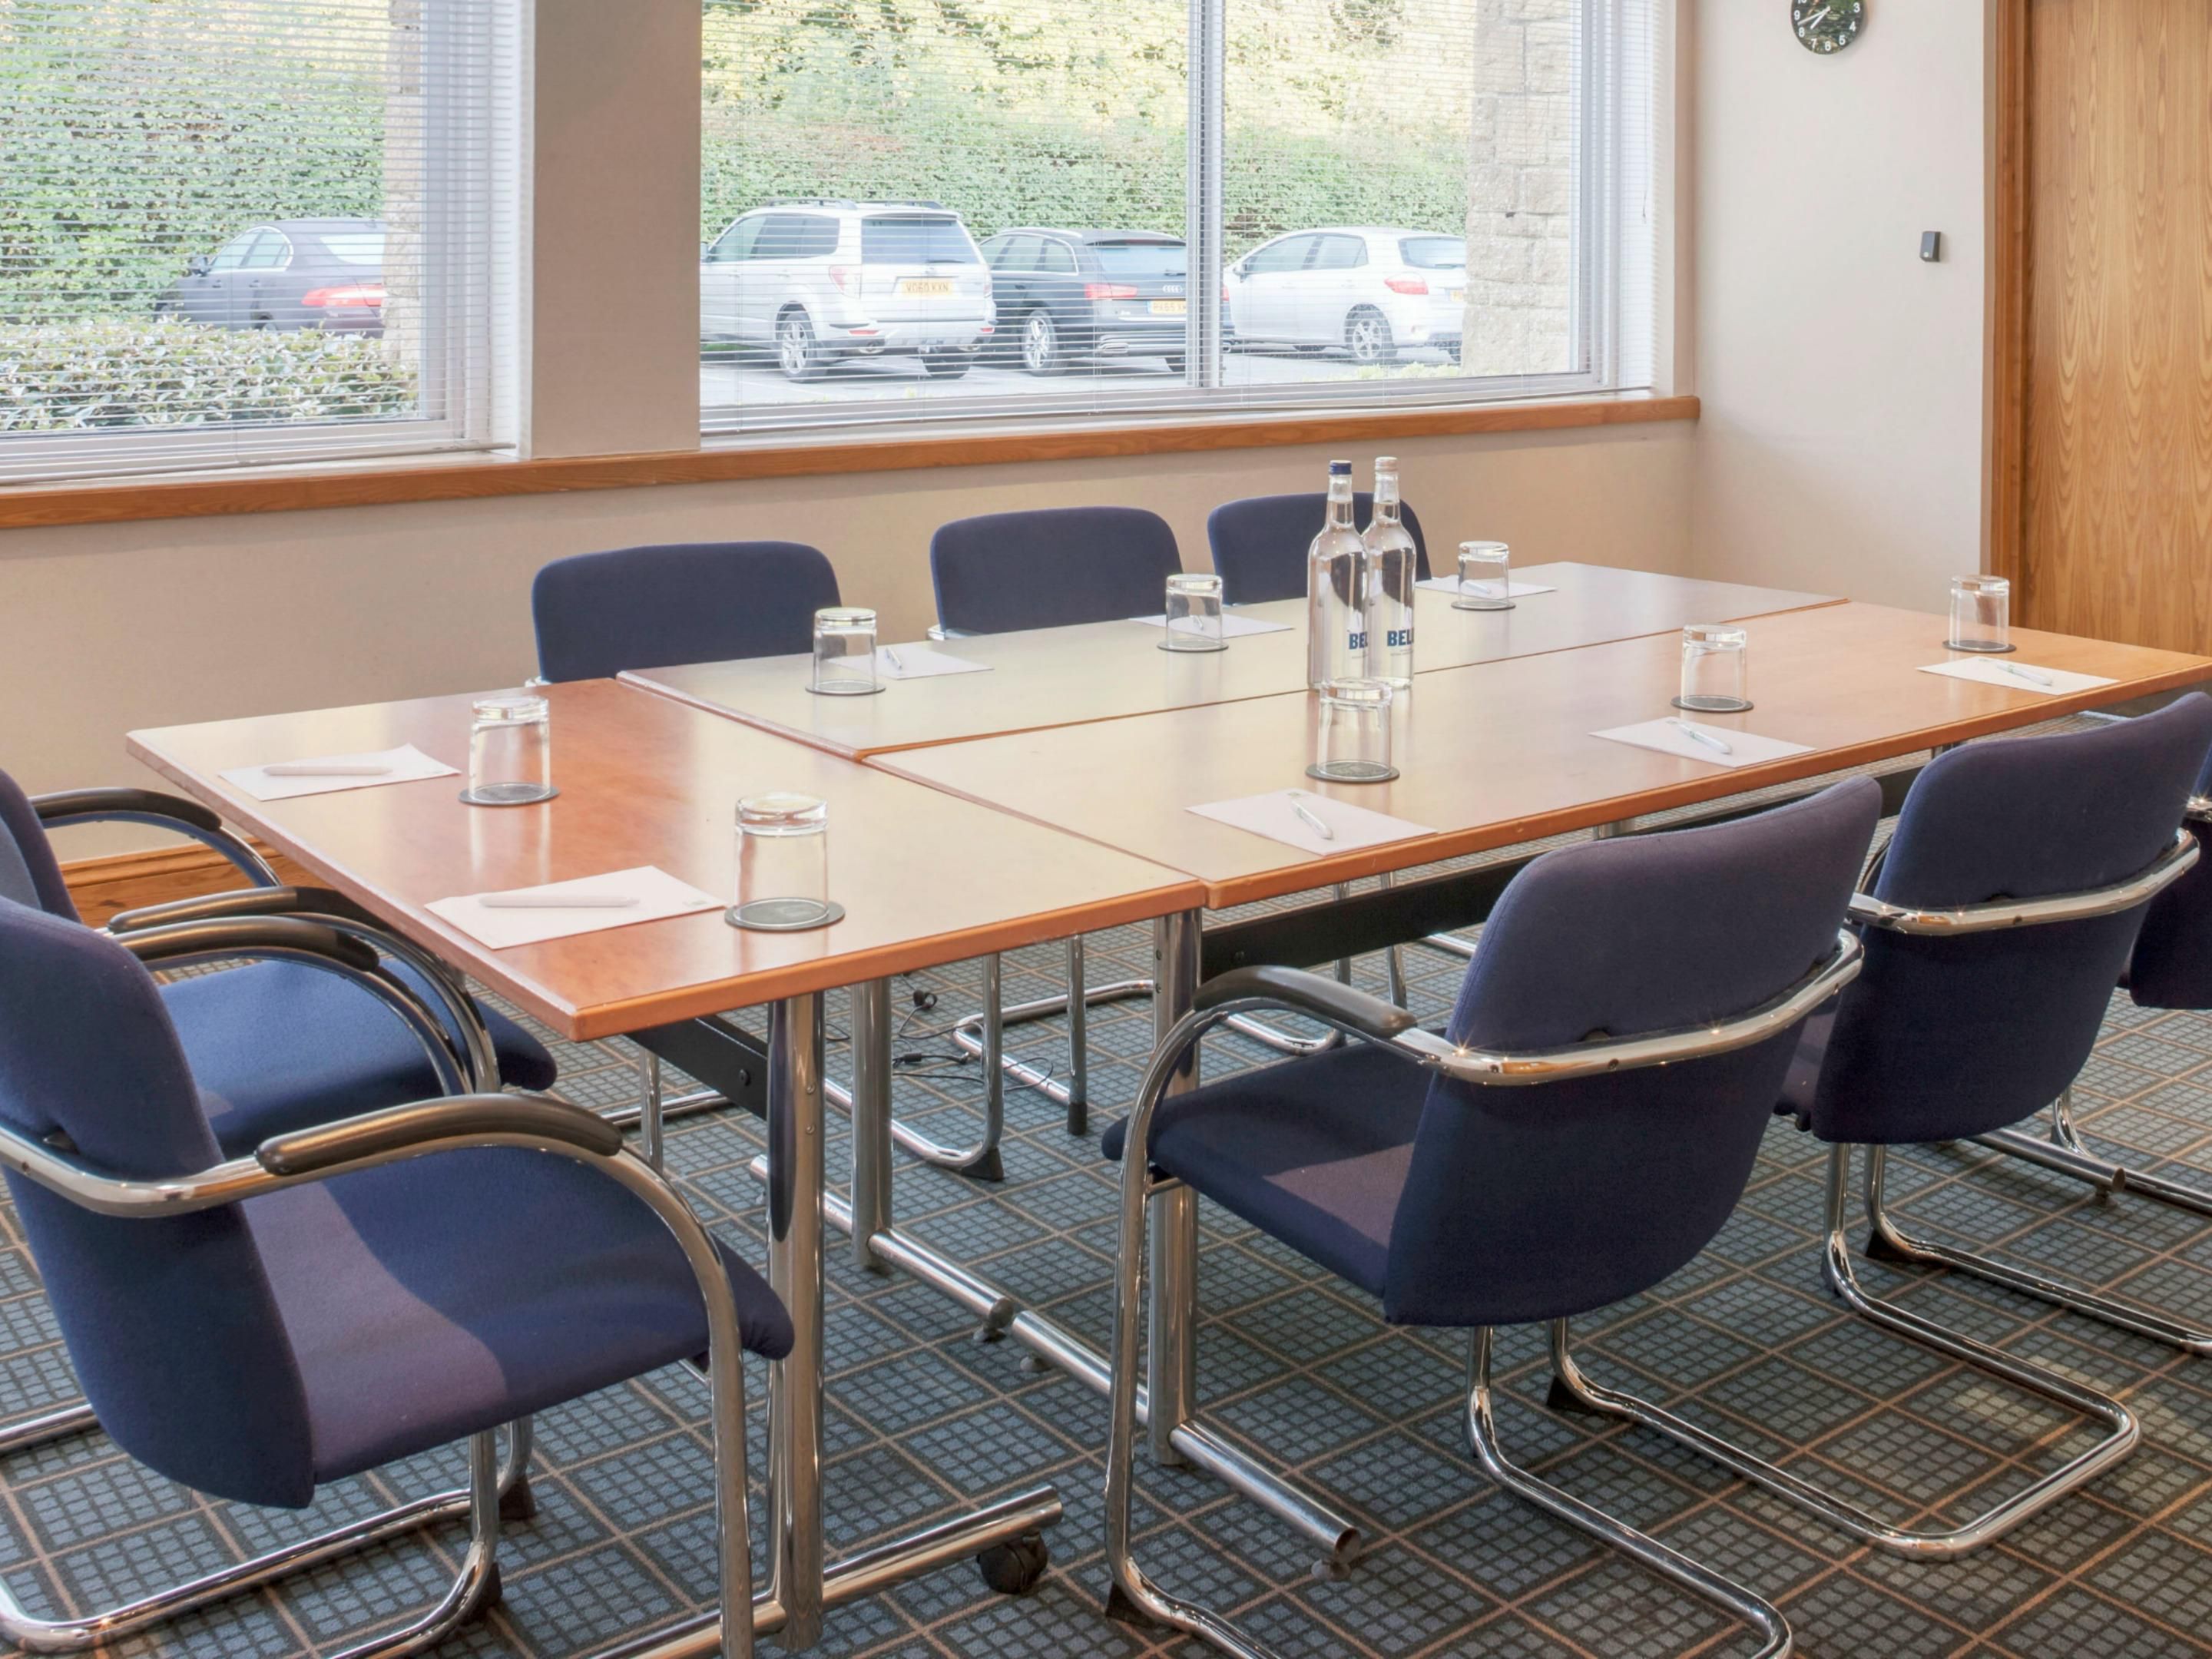 Looking for the perfect venue to host your next meeting? With us you can build your ideal package and our experienced staff will ensure your meeting runs smoothly.